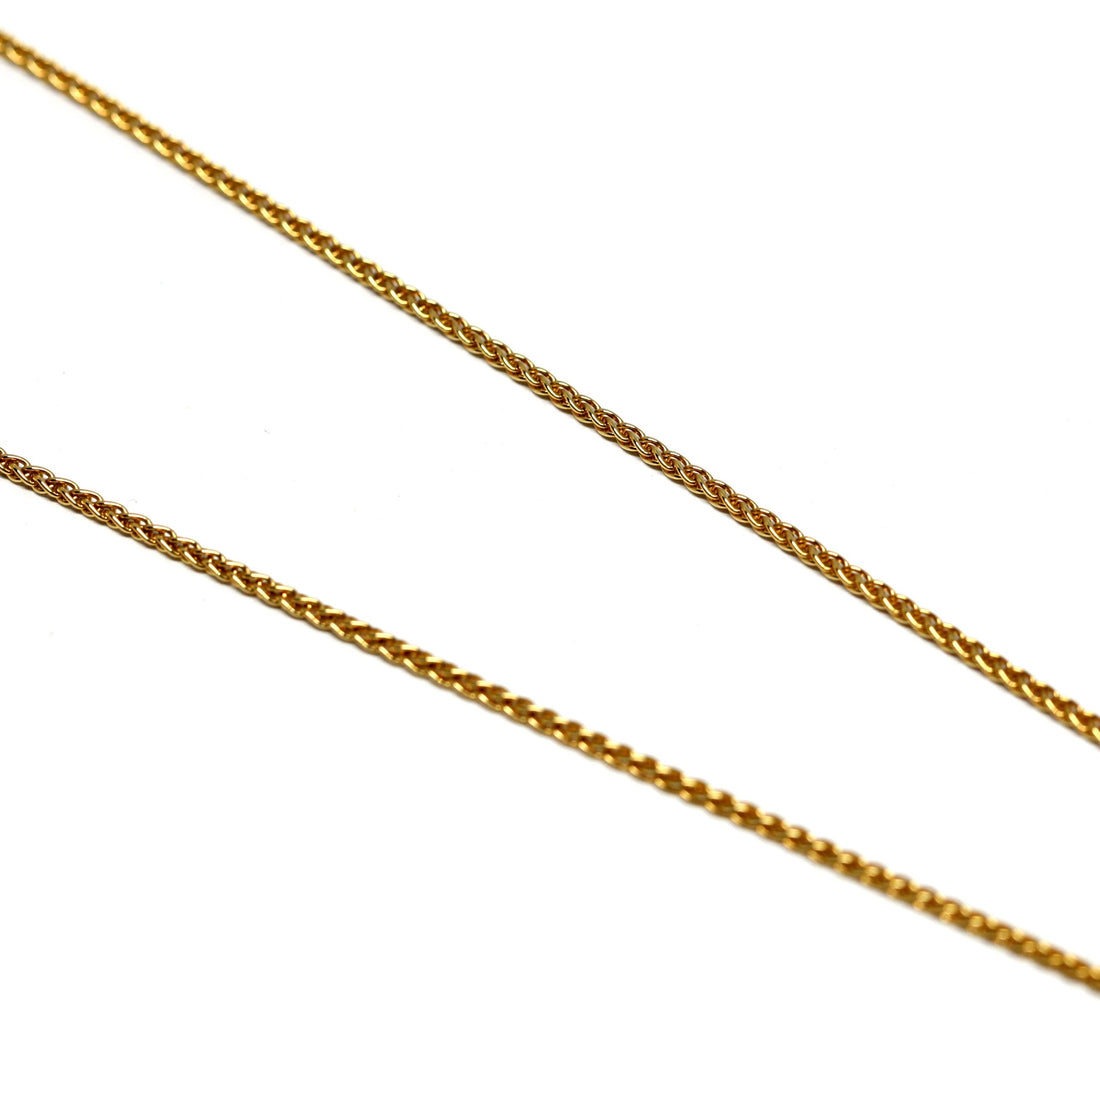 Bena Jewelry Silver Gold Plated Weat Chain Vermeil Modern Custom Jewerly Designer Montreal Made in Canada